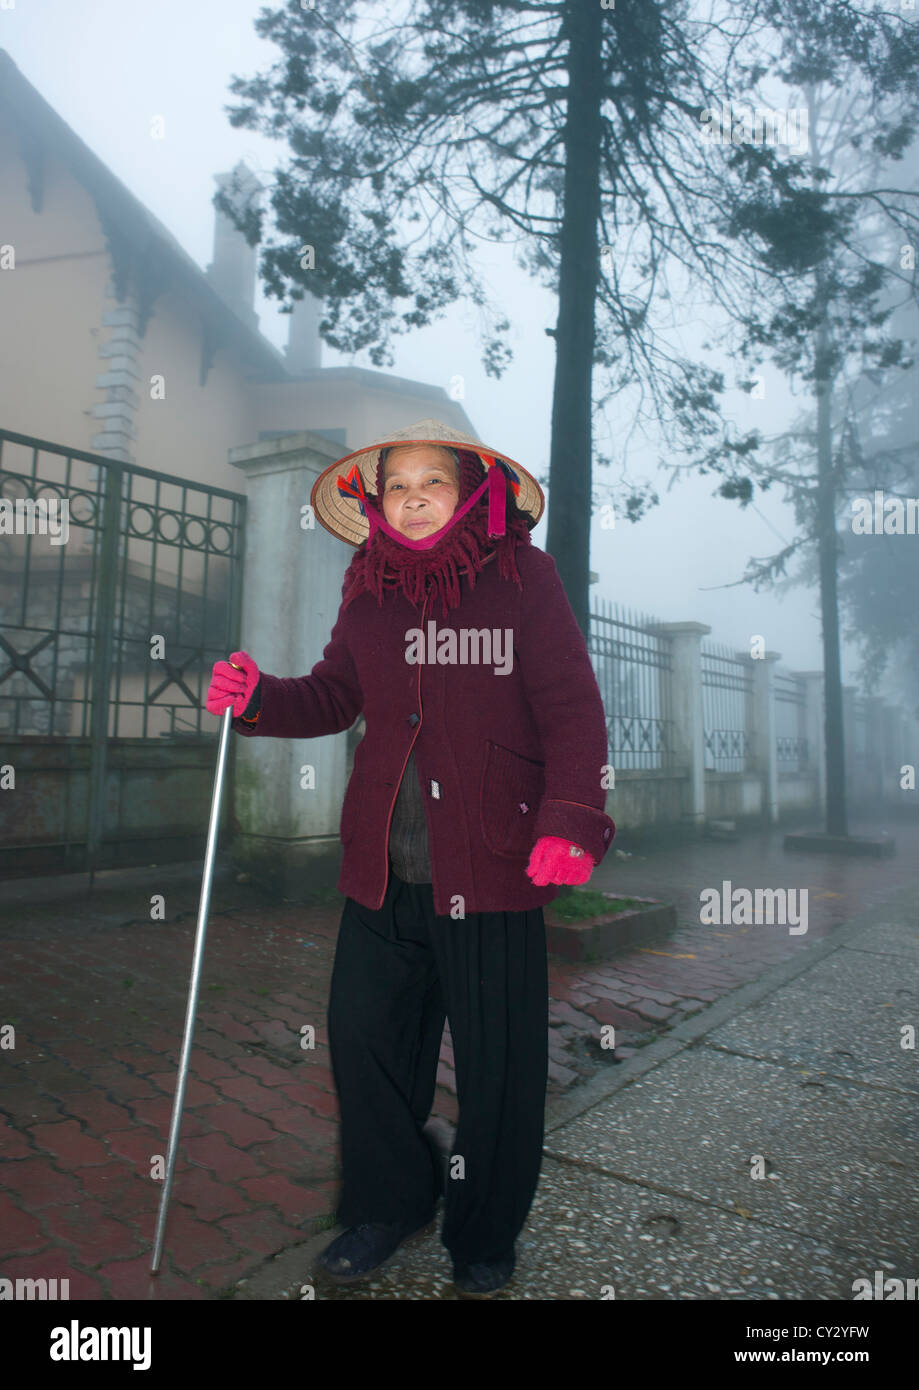 Old Woman With A Walking Stick In The Streets Of Sapa, Vietnam Stock Photo